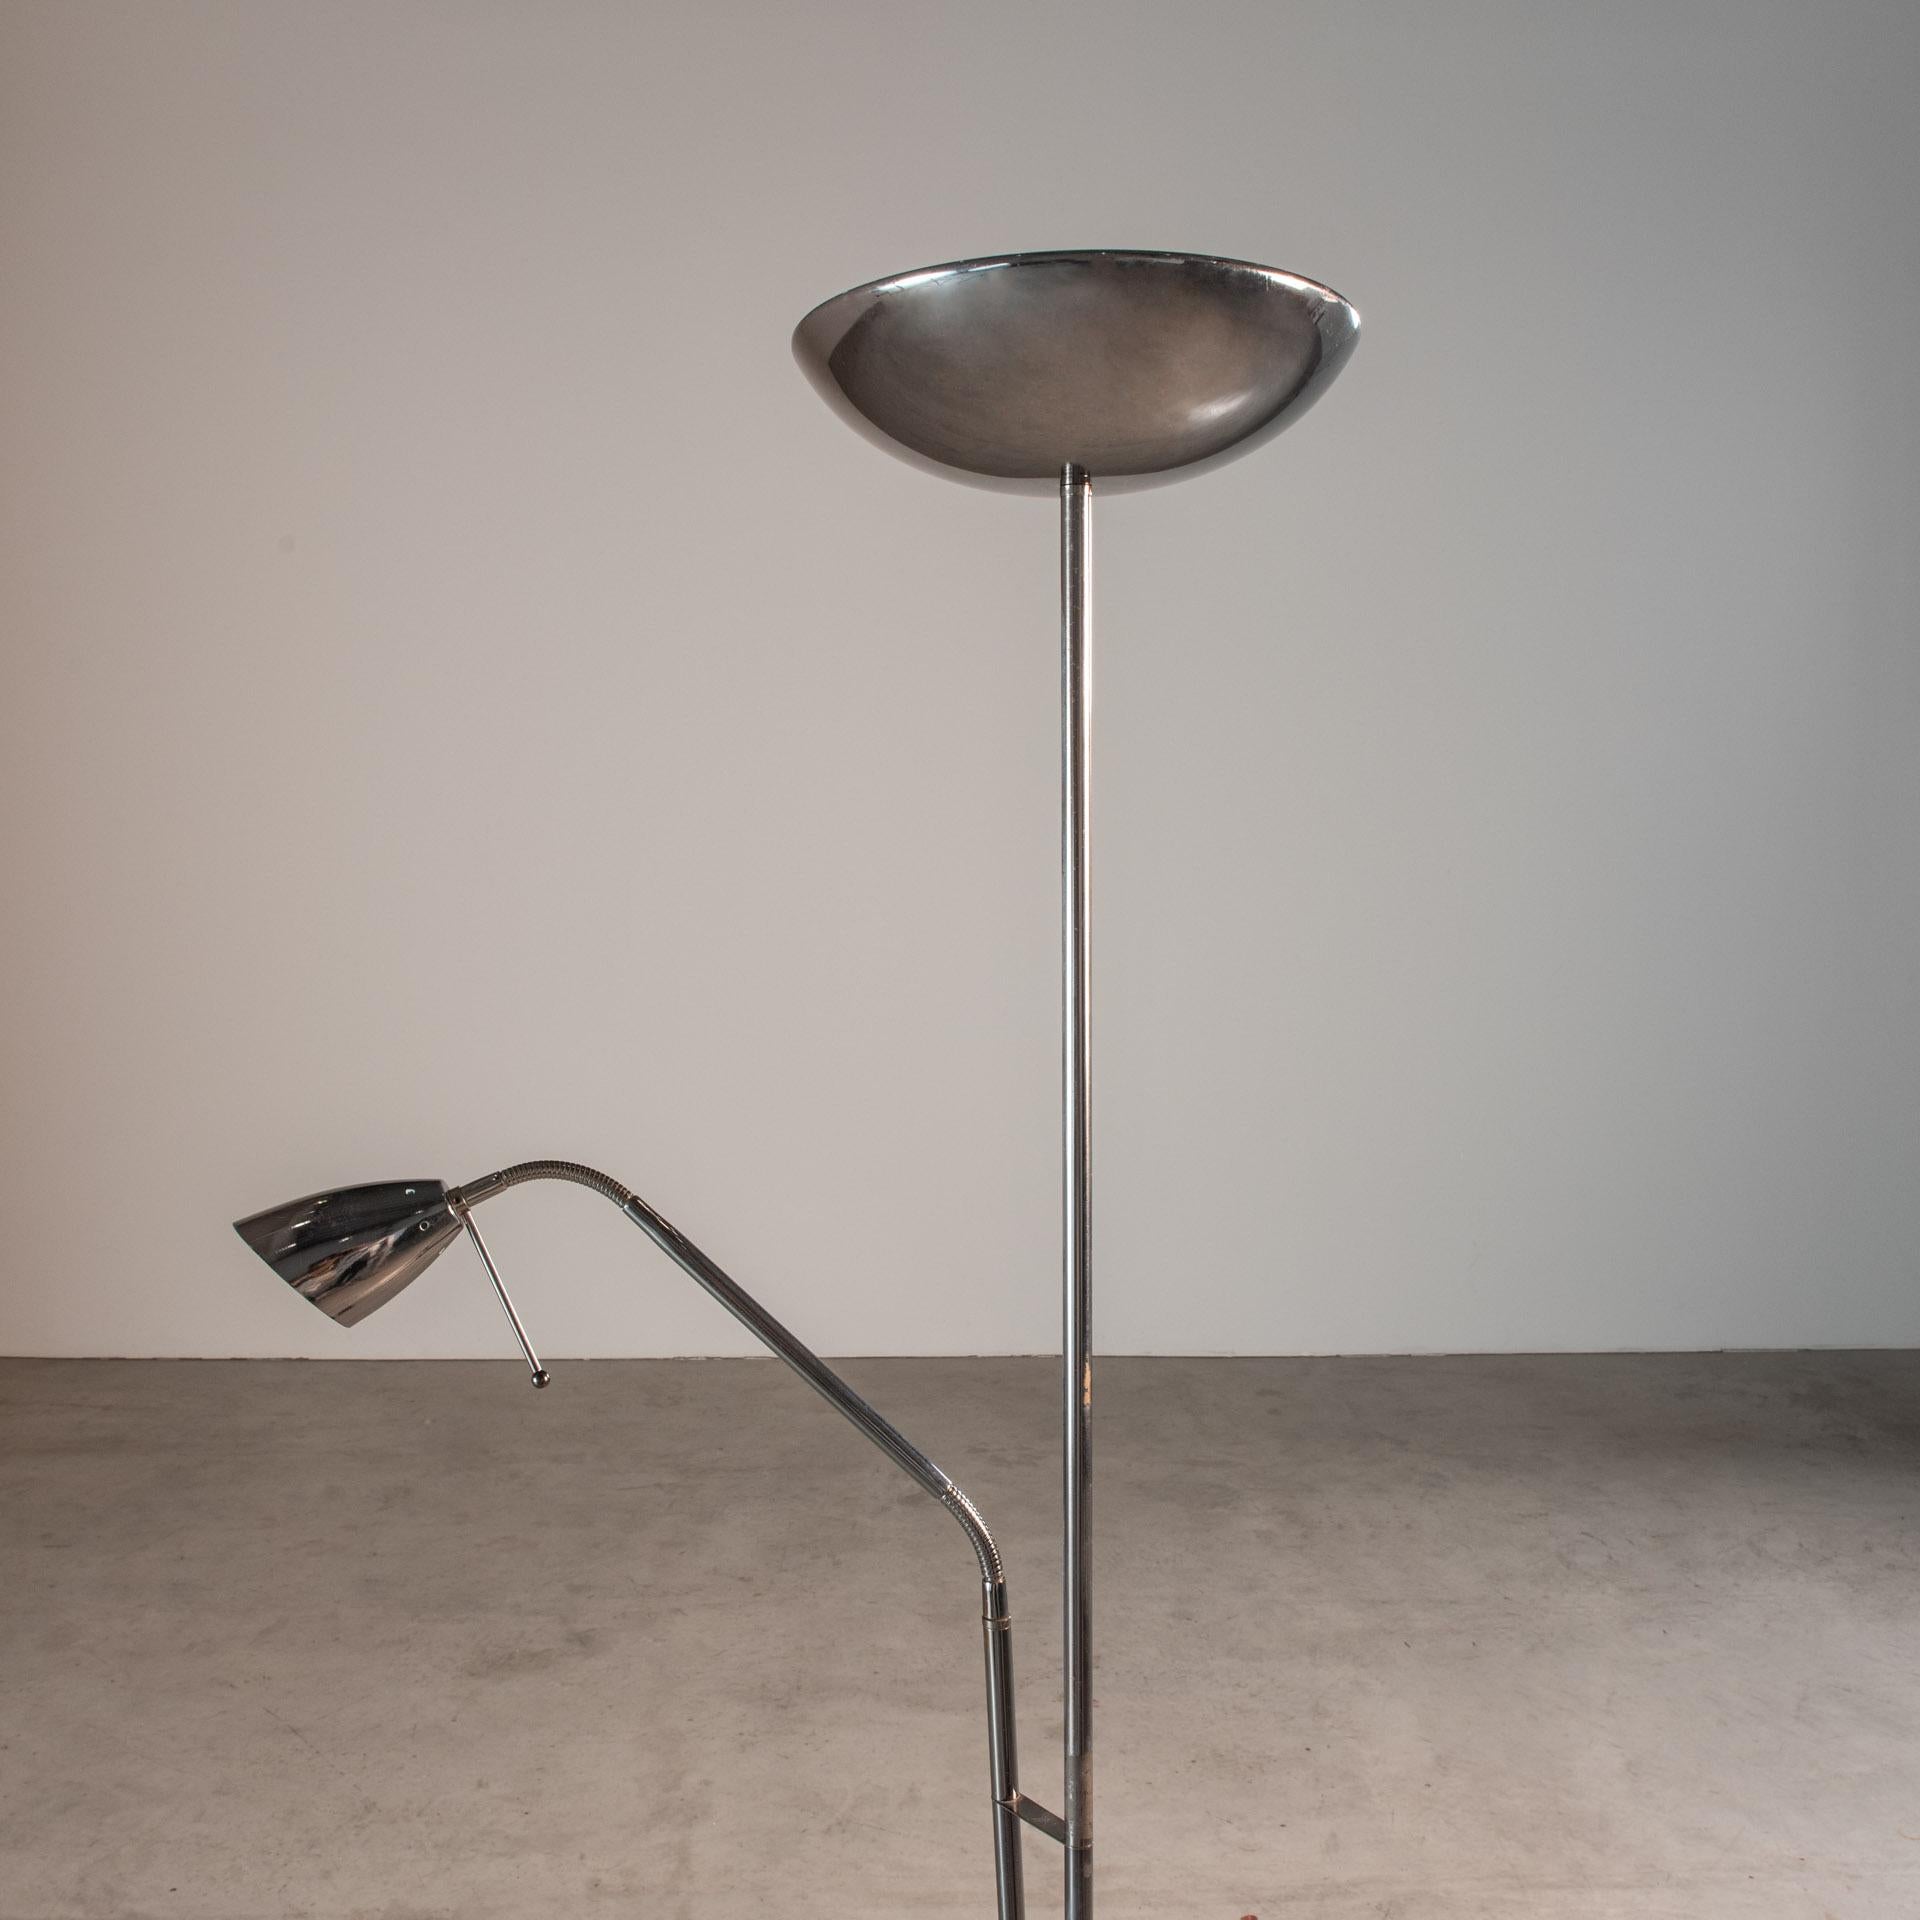 Floor Lamp in Chrome with two Arms, by Dominici, Brazilian Mid-Century Design In Good Condition For Sale In Sao Paulo, SP